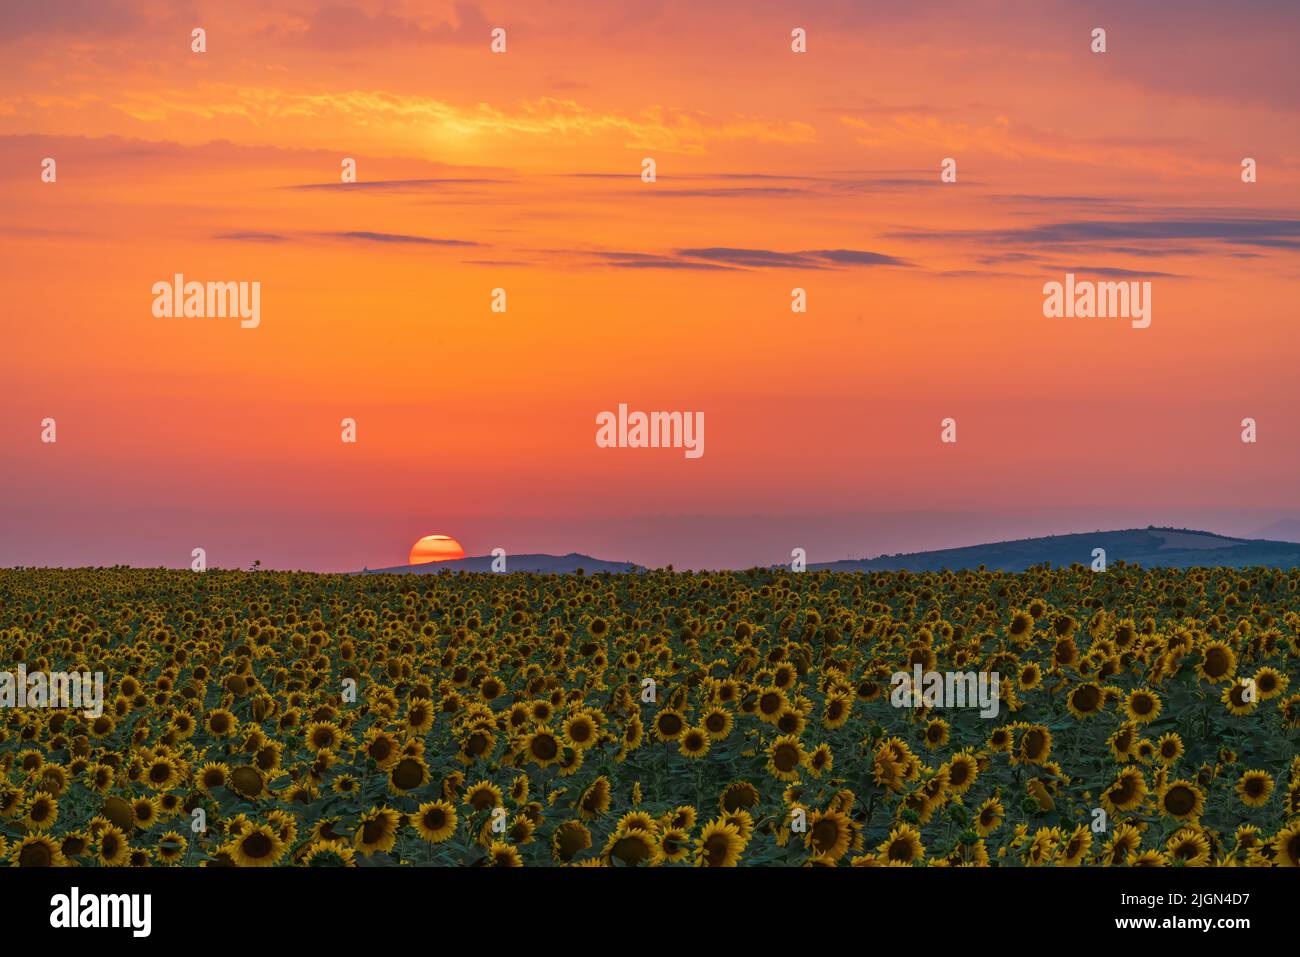 Sunflower field at sunset time Stock Photo